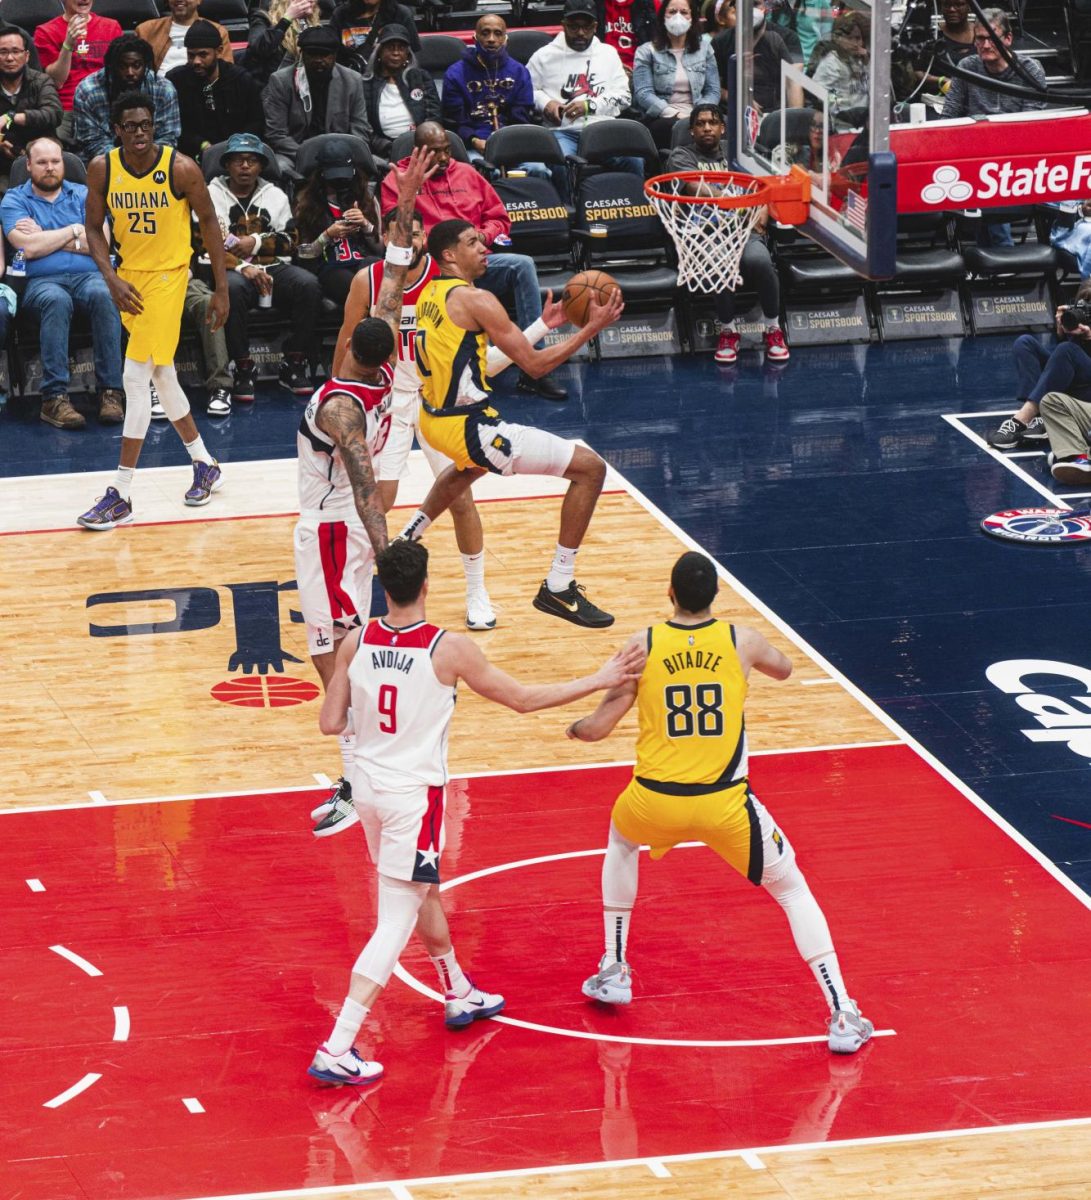 Indiana Pacers guard Tyrese Haliburton going up for a layup against the Washington Wizards.